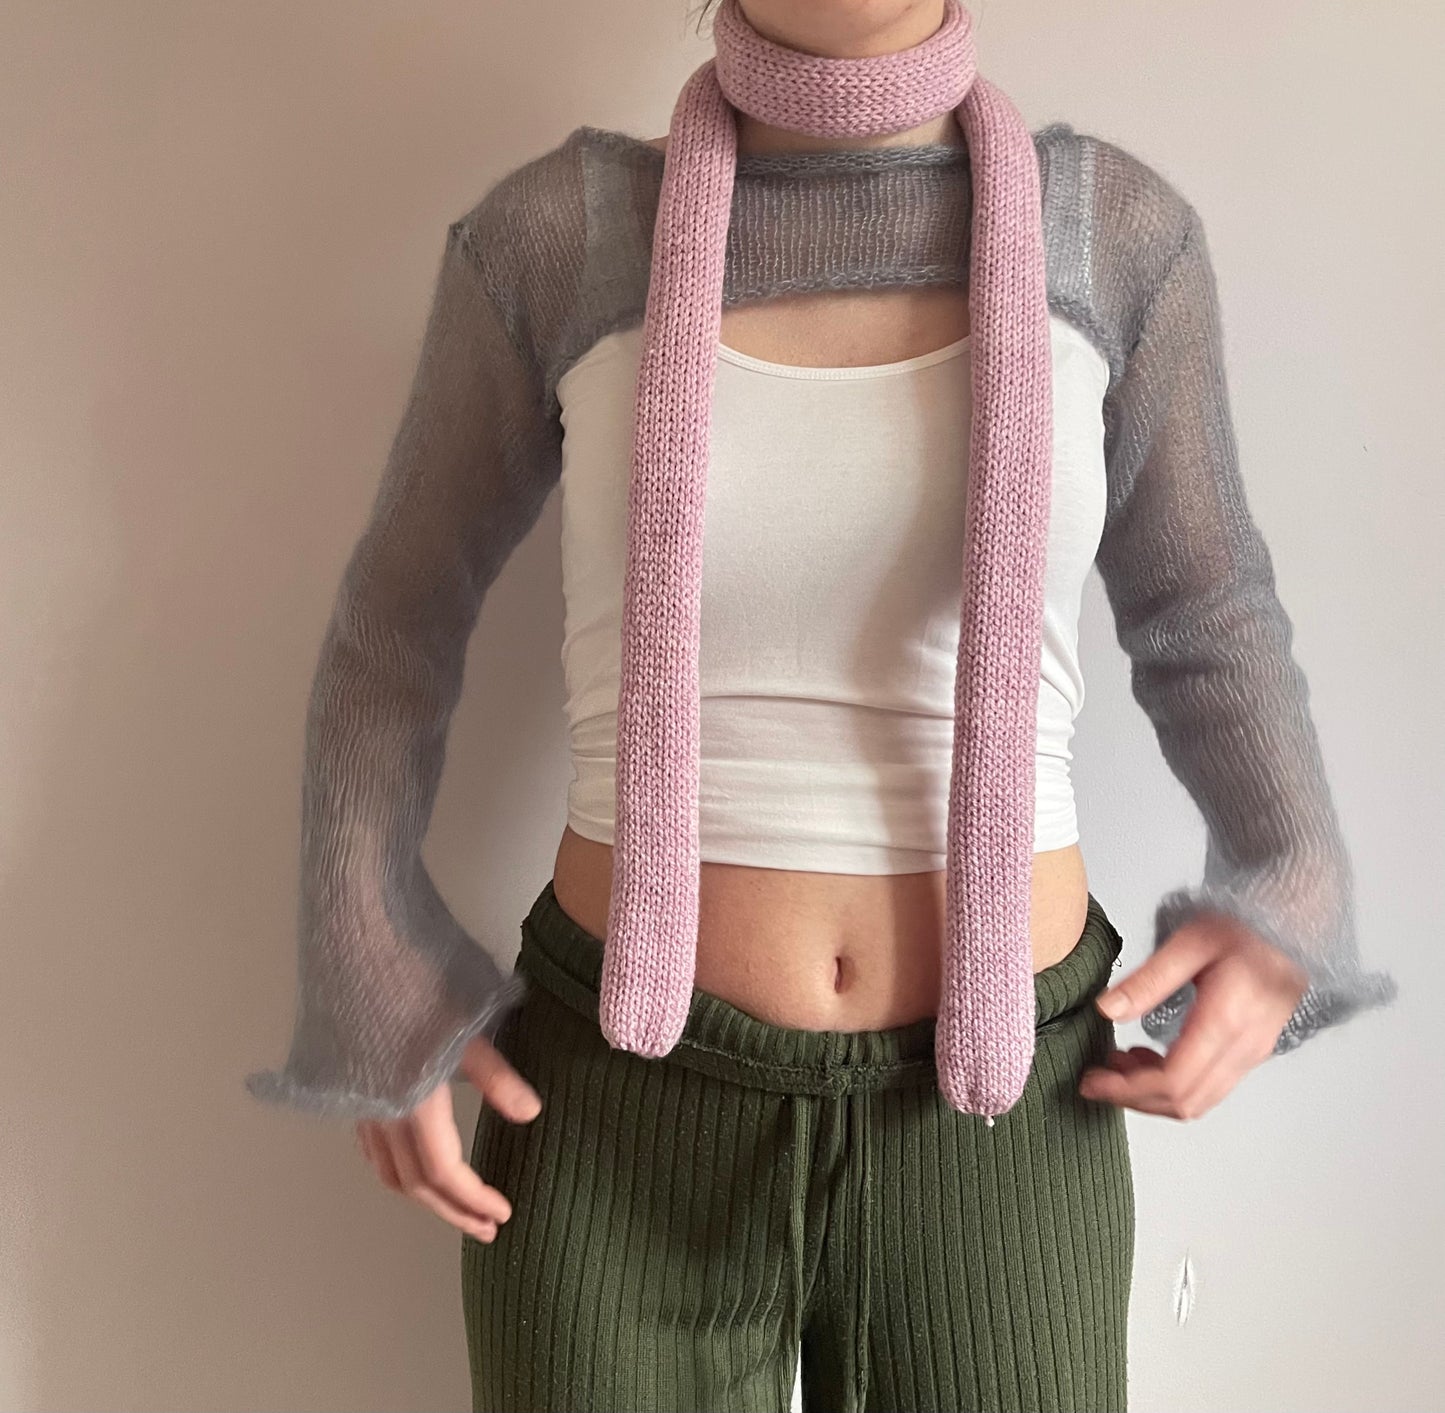 Handmade knitted skinny scarf in dusky pink